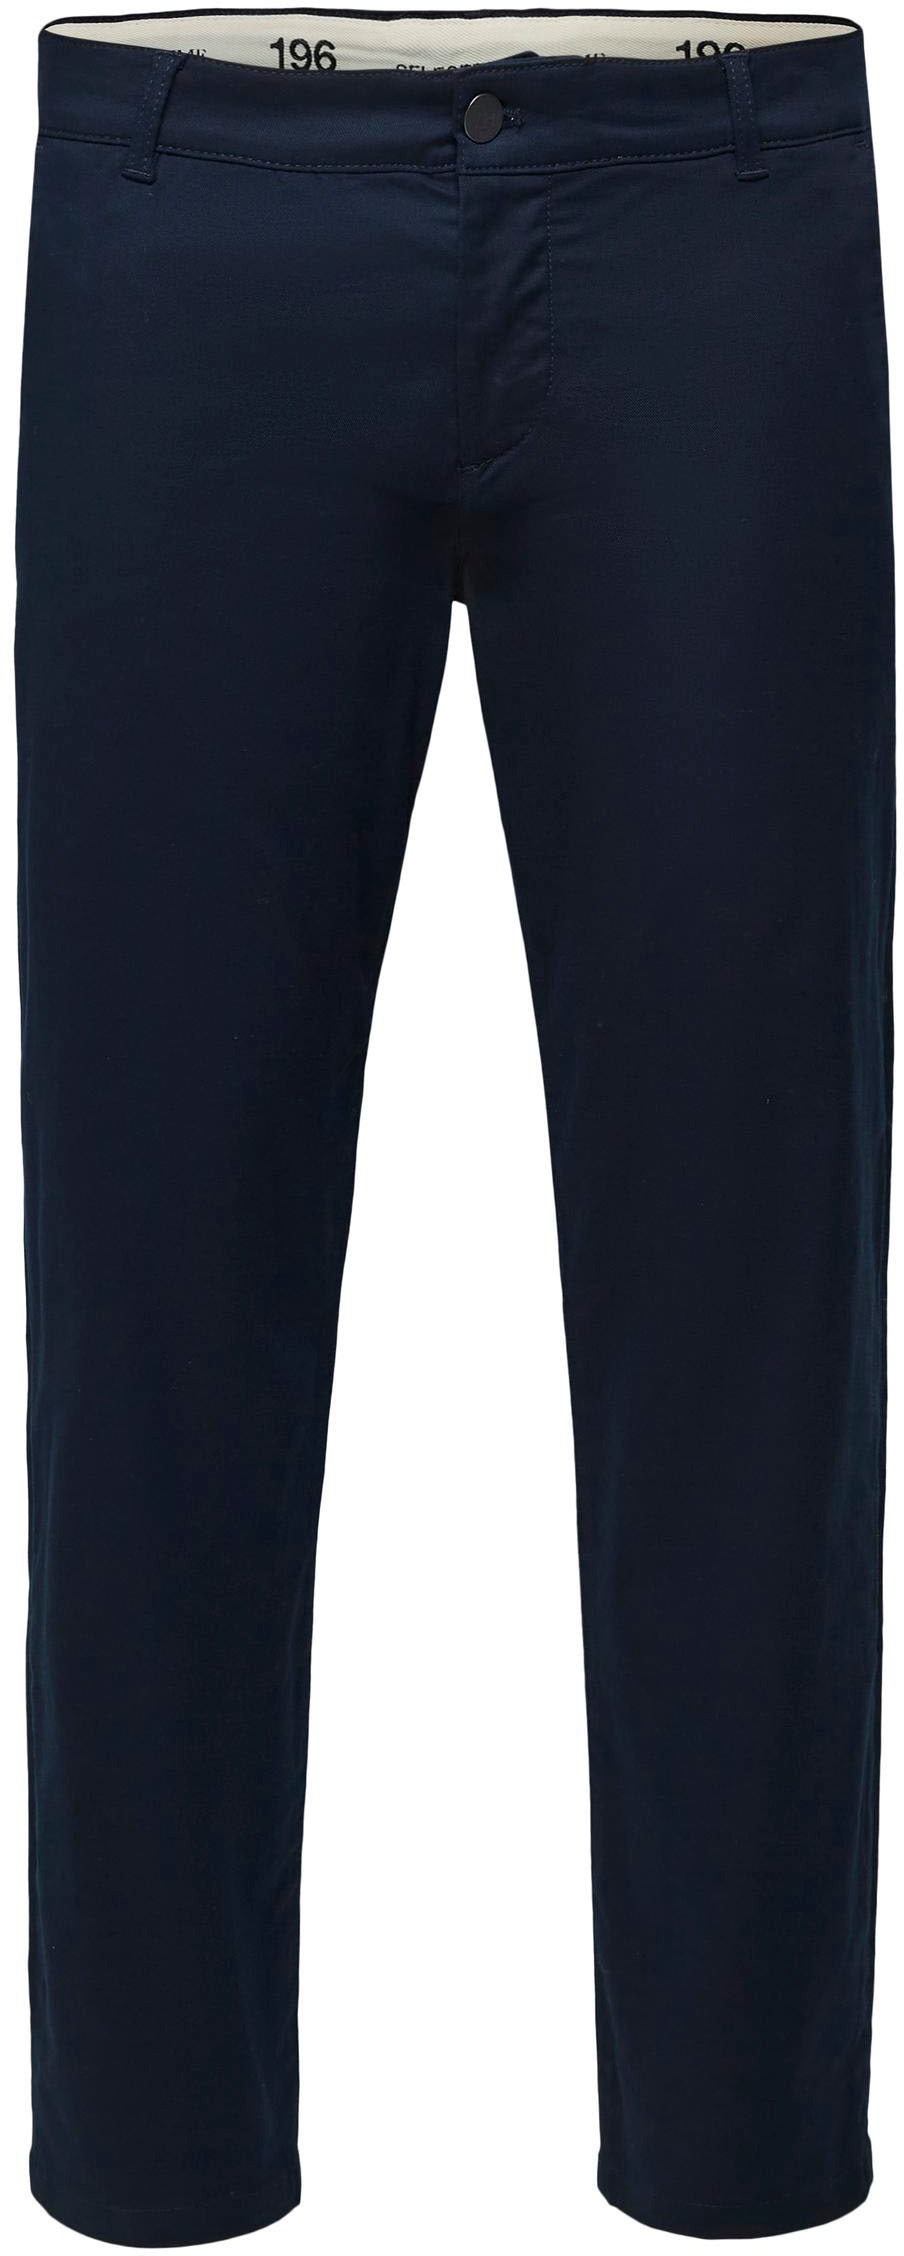 »SE bestellen SELECTED Chinohose HOMME im Chino« Online-Shop